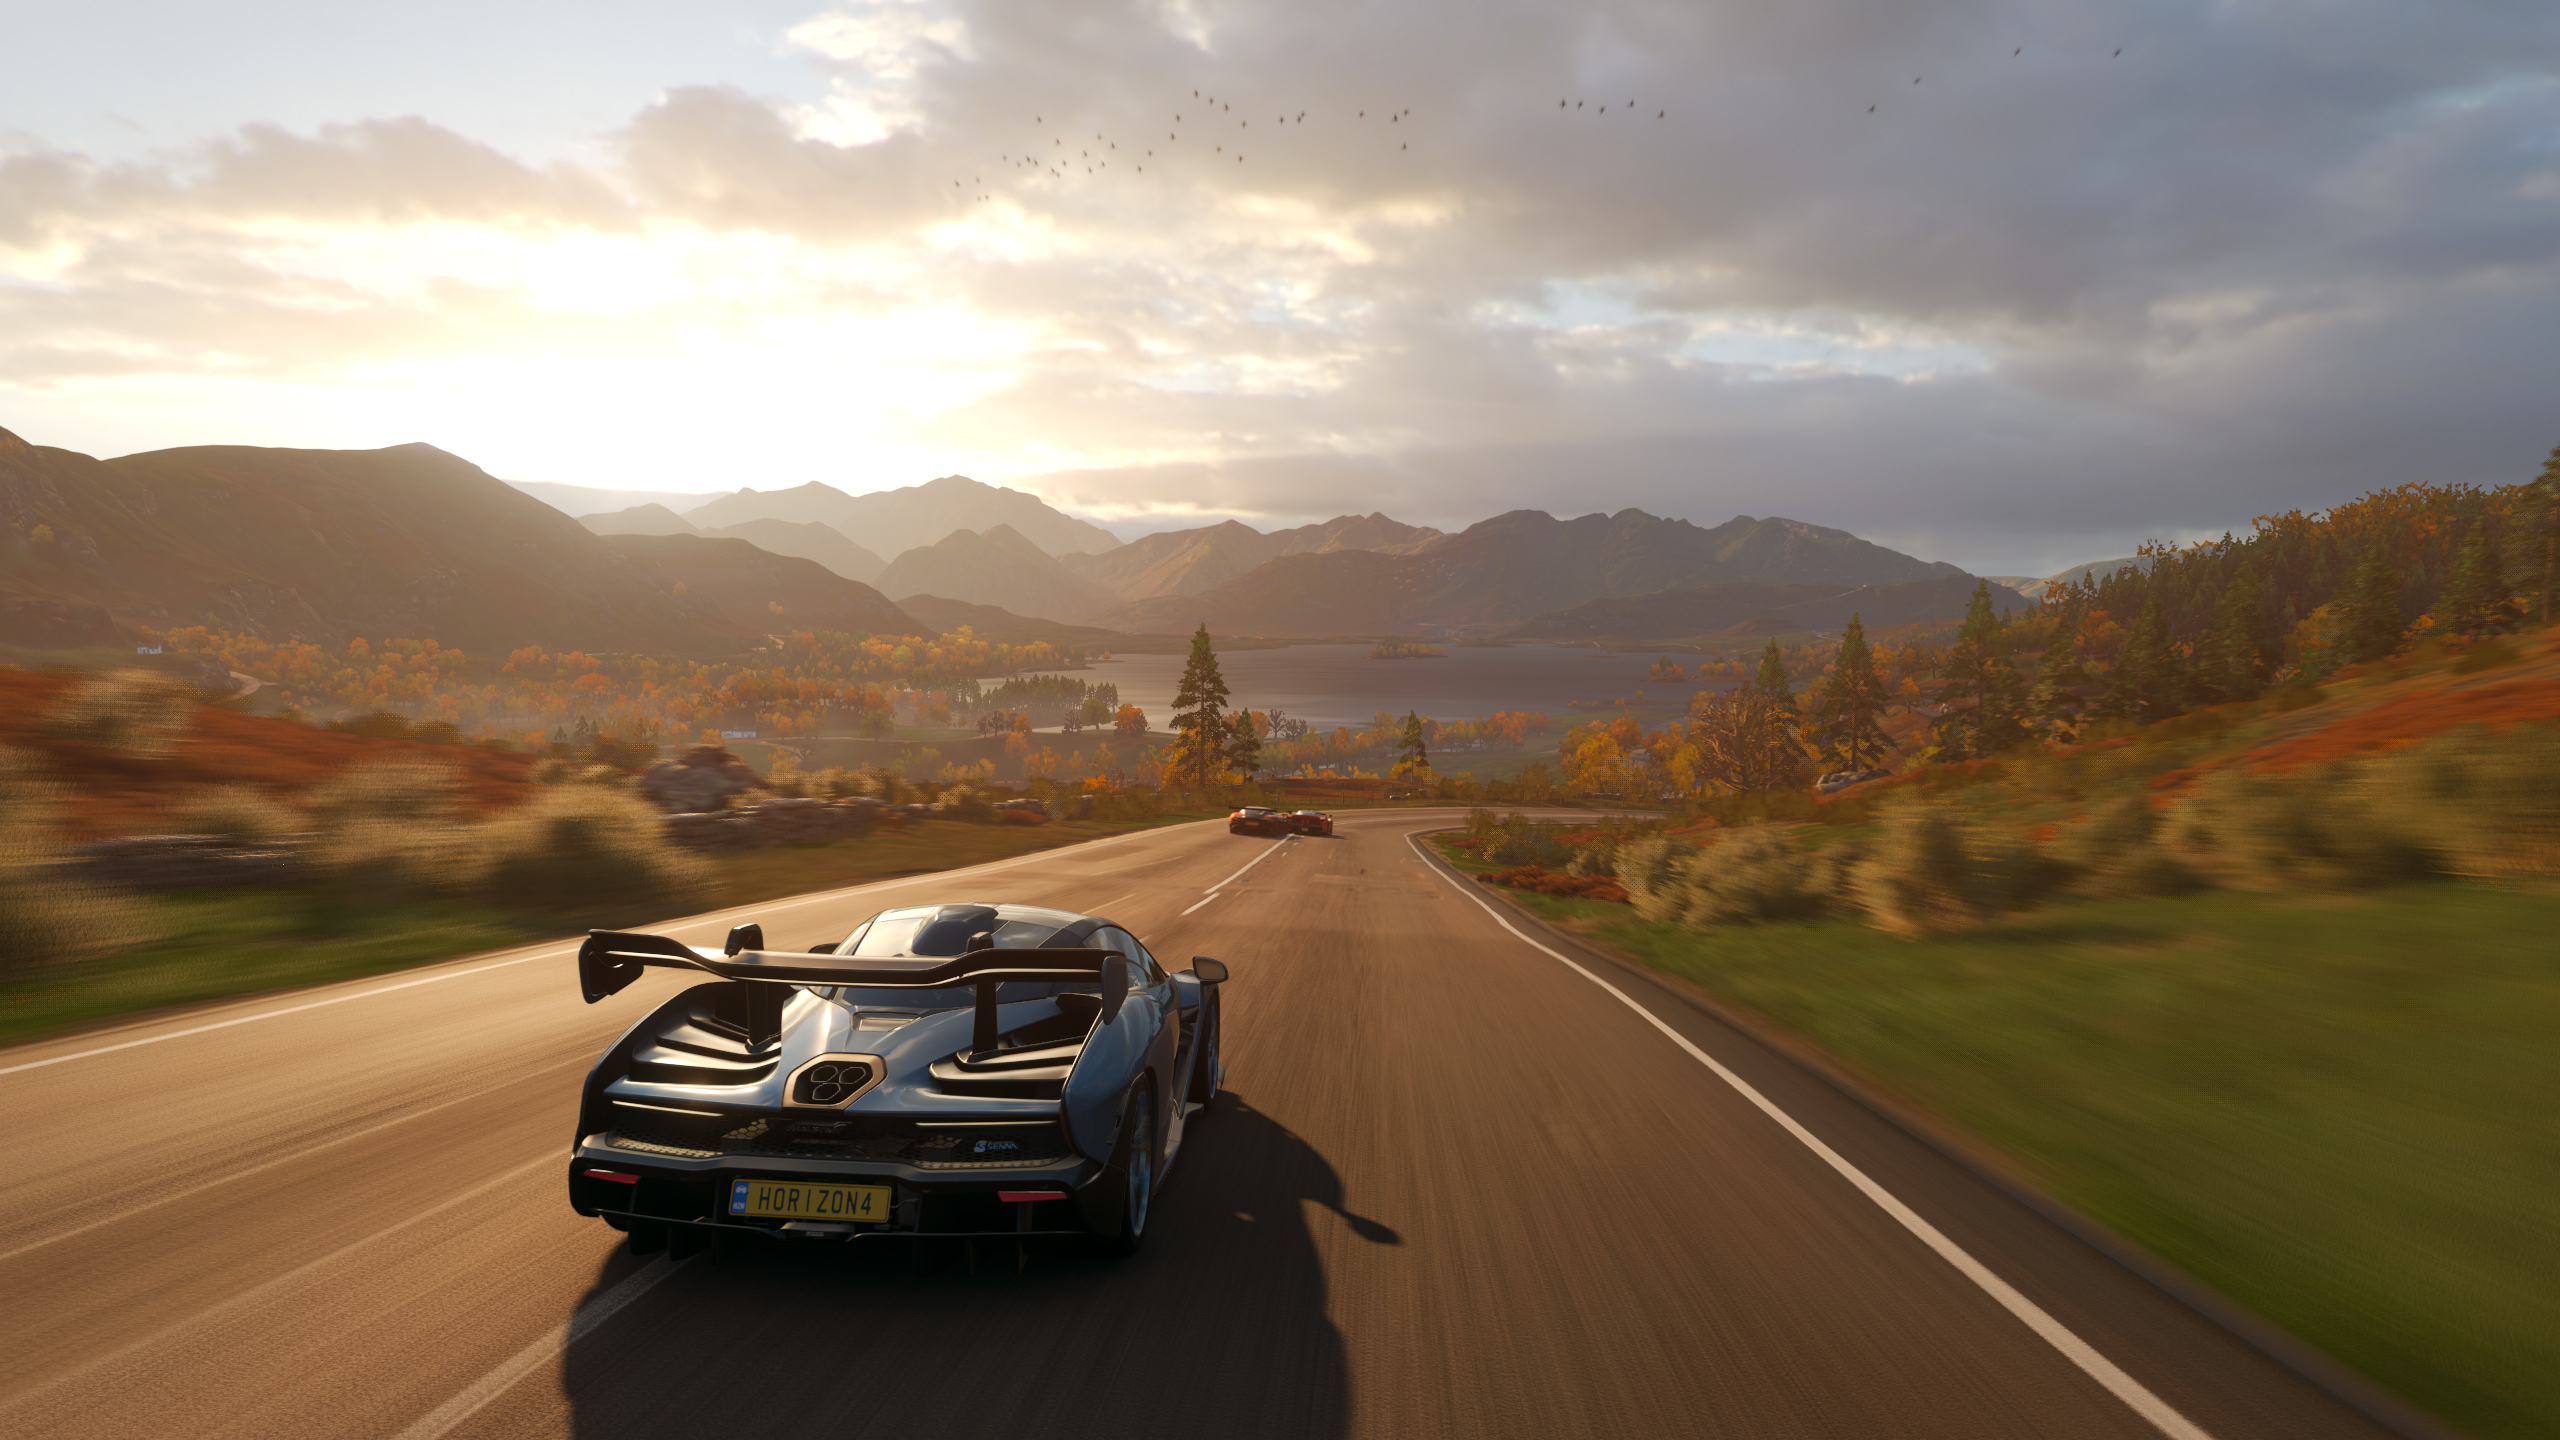 Forza Horizon 4 | Location and Assets